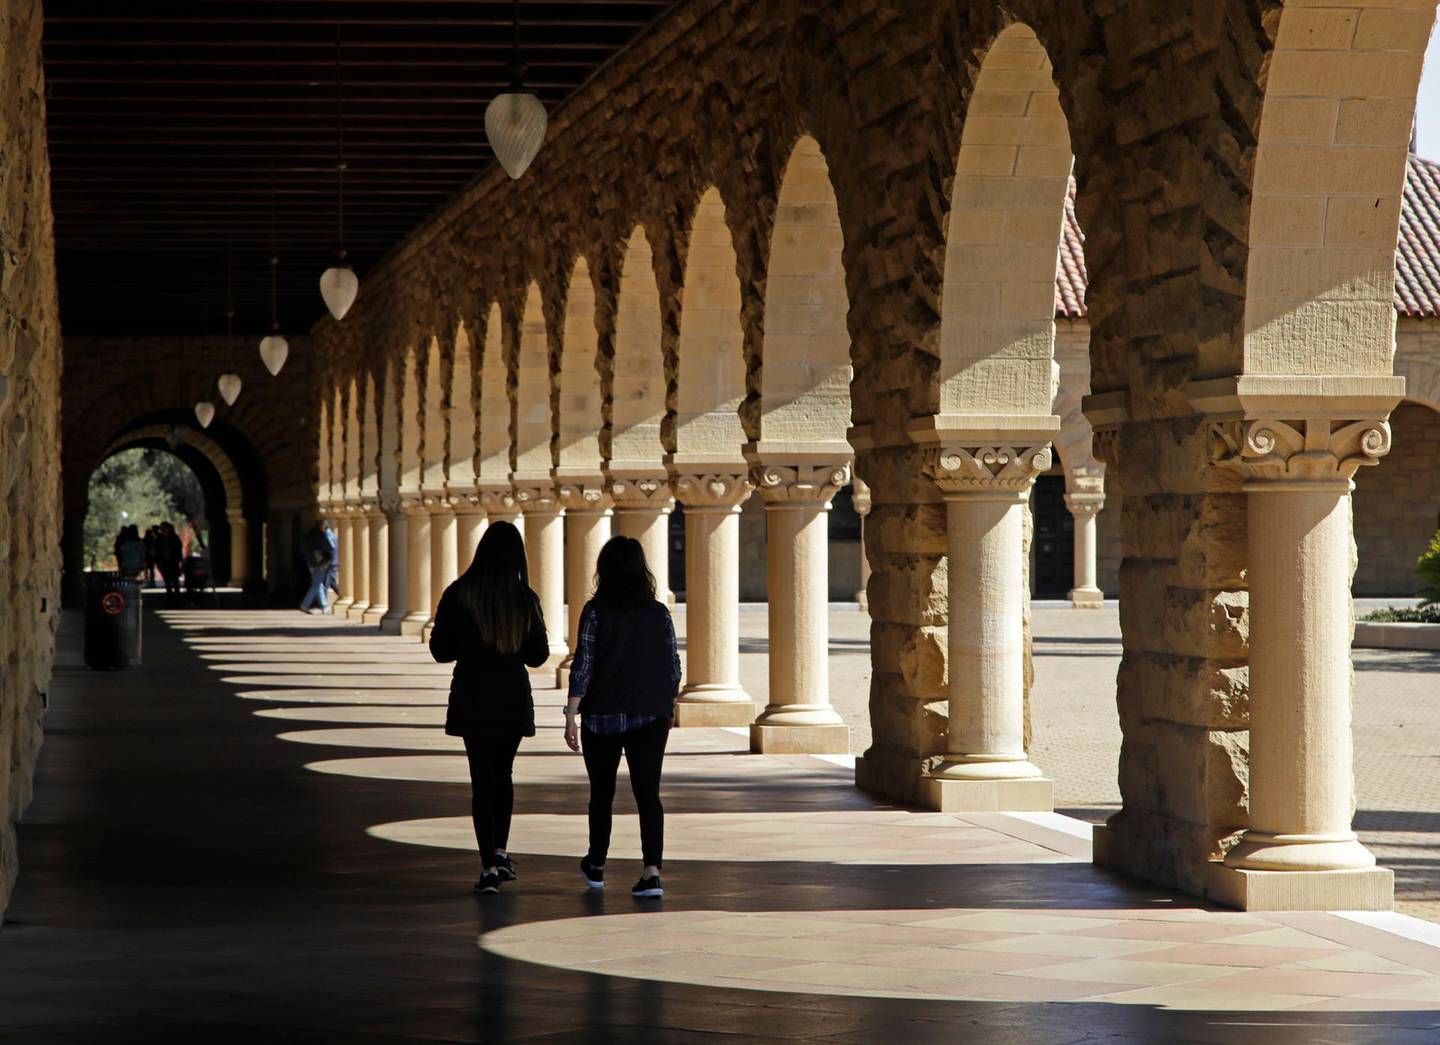 FILE - In this March 14, 2019, file photo students walk on the Stanford University campus in Santa Clara, Calif. In a study released Monday, Aug. 24, 2020, the Interfaith Diversity Experiences and Attitudes Longitudinal Survey (IDEALS) said U.S. college students spend a significant time learning about people of different races, political affiliations and sexual orientations and much less time learning about people of different religious and worldview groups. Researchers also said that college students show â€œhigh levels of respect and goodwill toward people who hold diverse religious perspectives.â€   (AP Photo/Ben Margot, File)